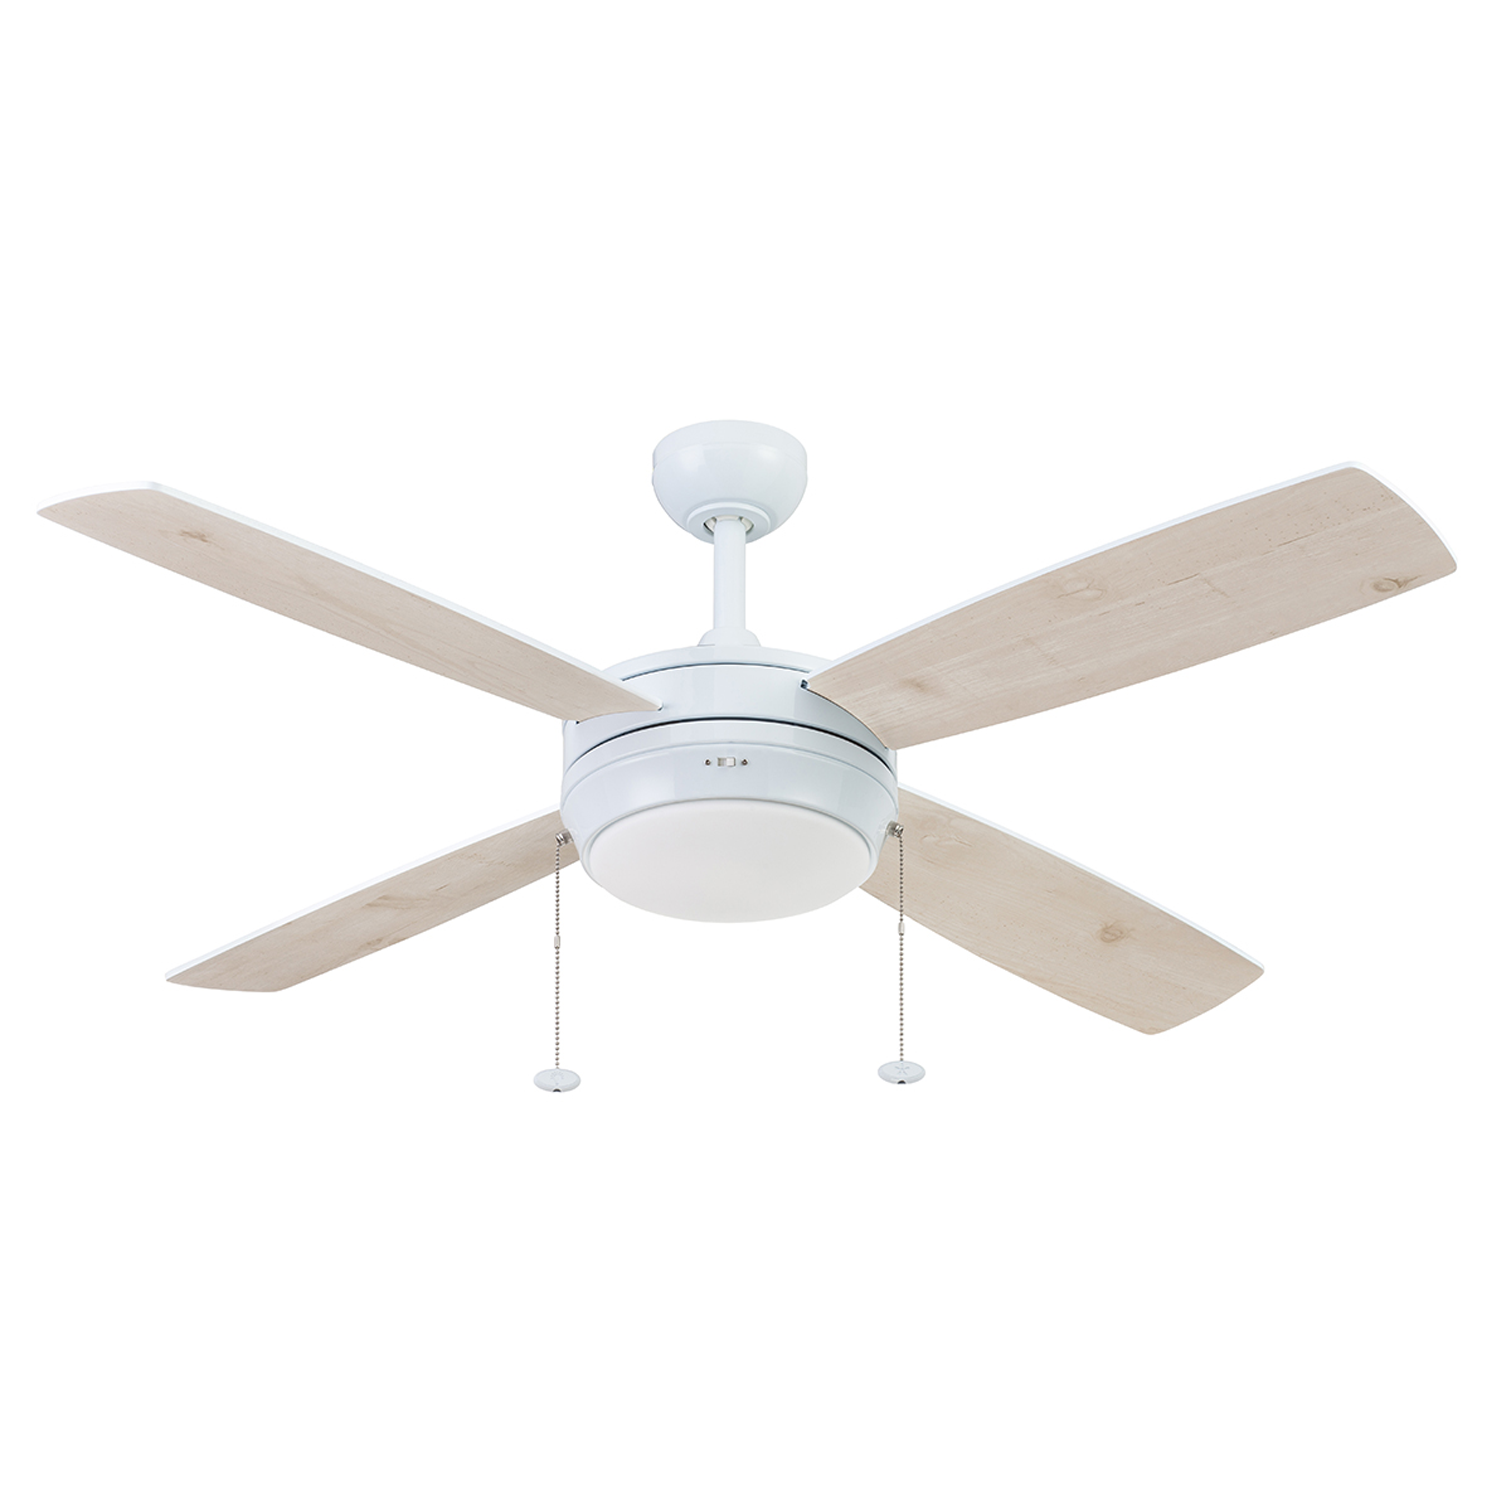 52 Inch Kailani, Bright White, Pull Chain, Ceiling Fan by Prominence Home